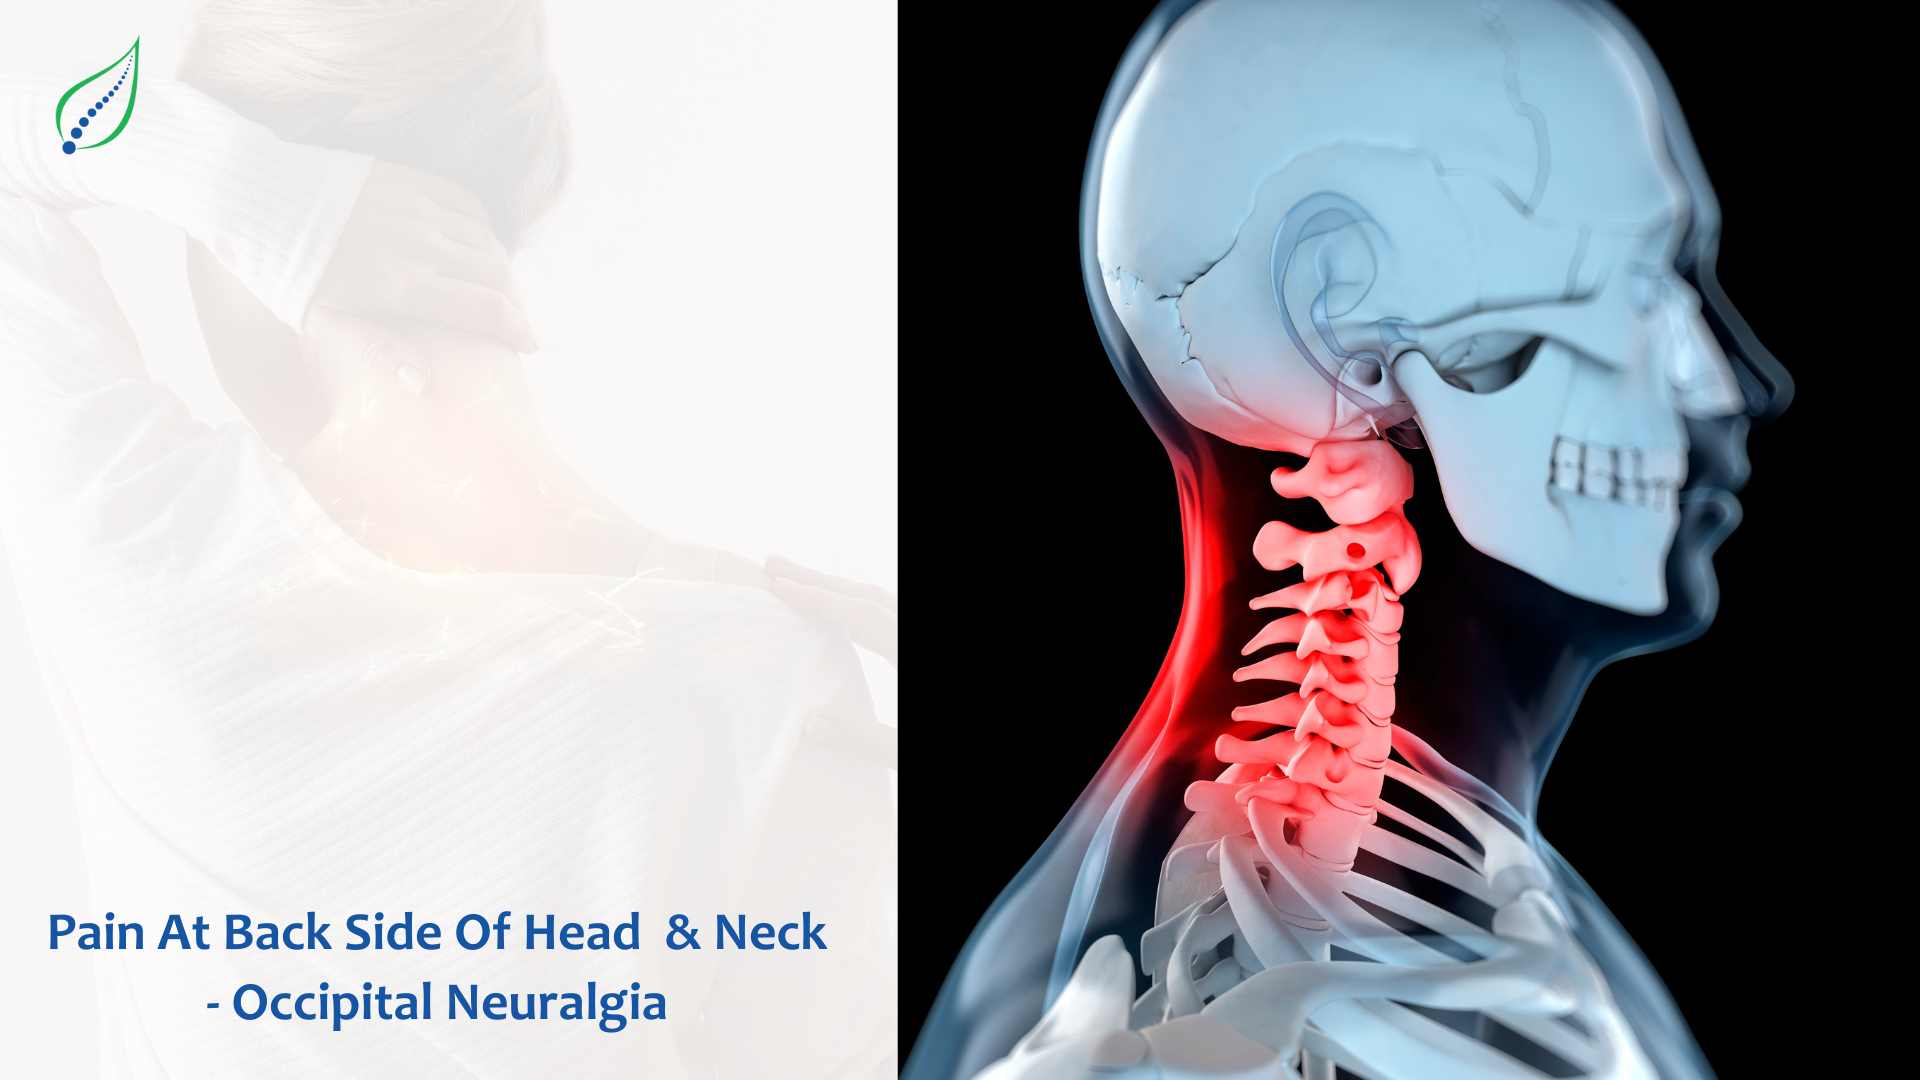 Pain At Back Side Of Head & Neck - Occipital Neuralgia